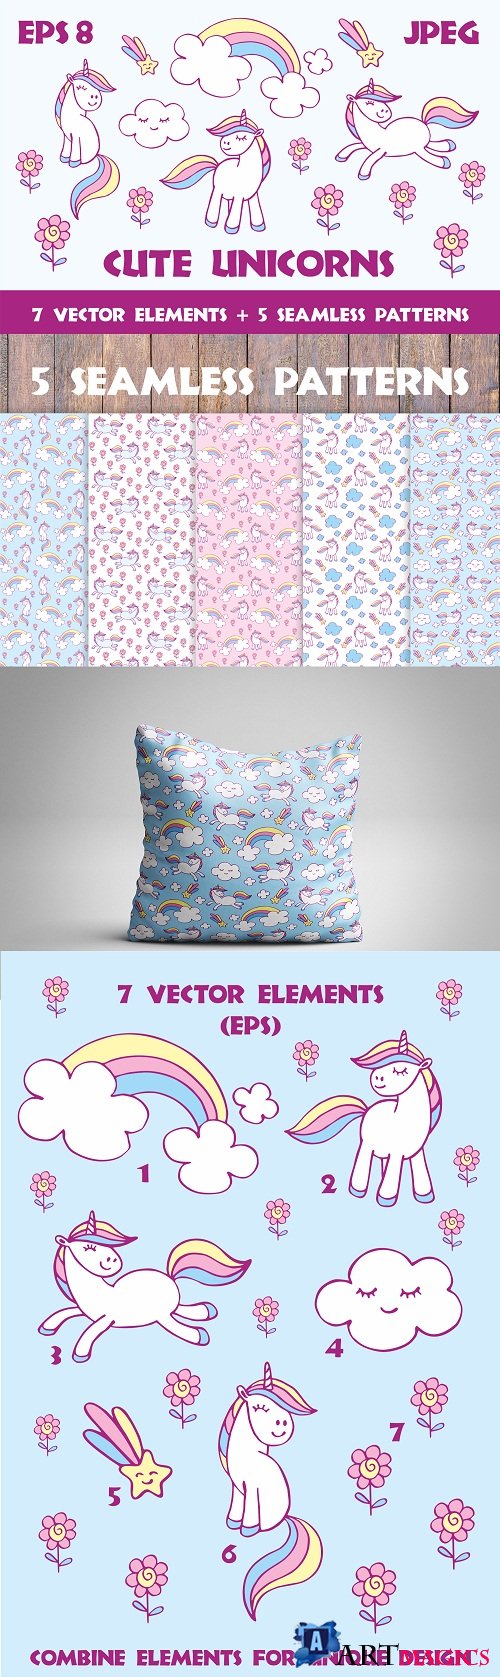 Cute unicorns. Vector elements and pattern - 20398